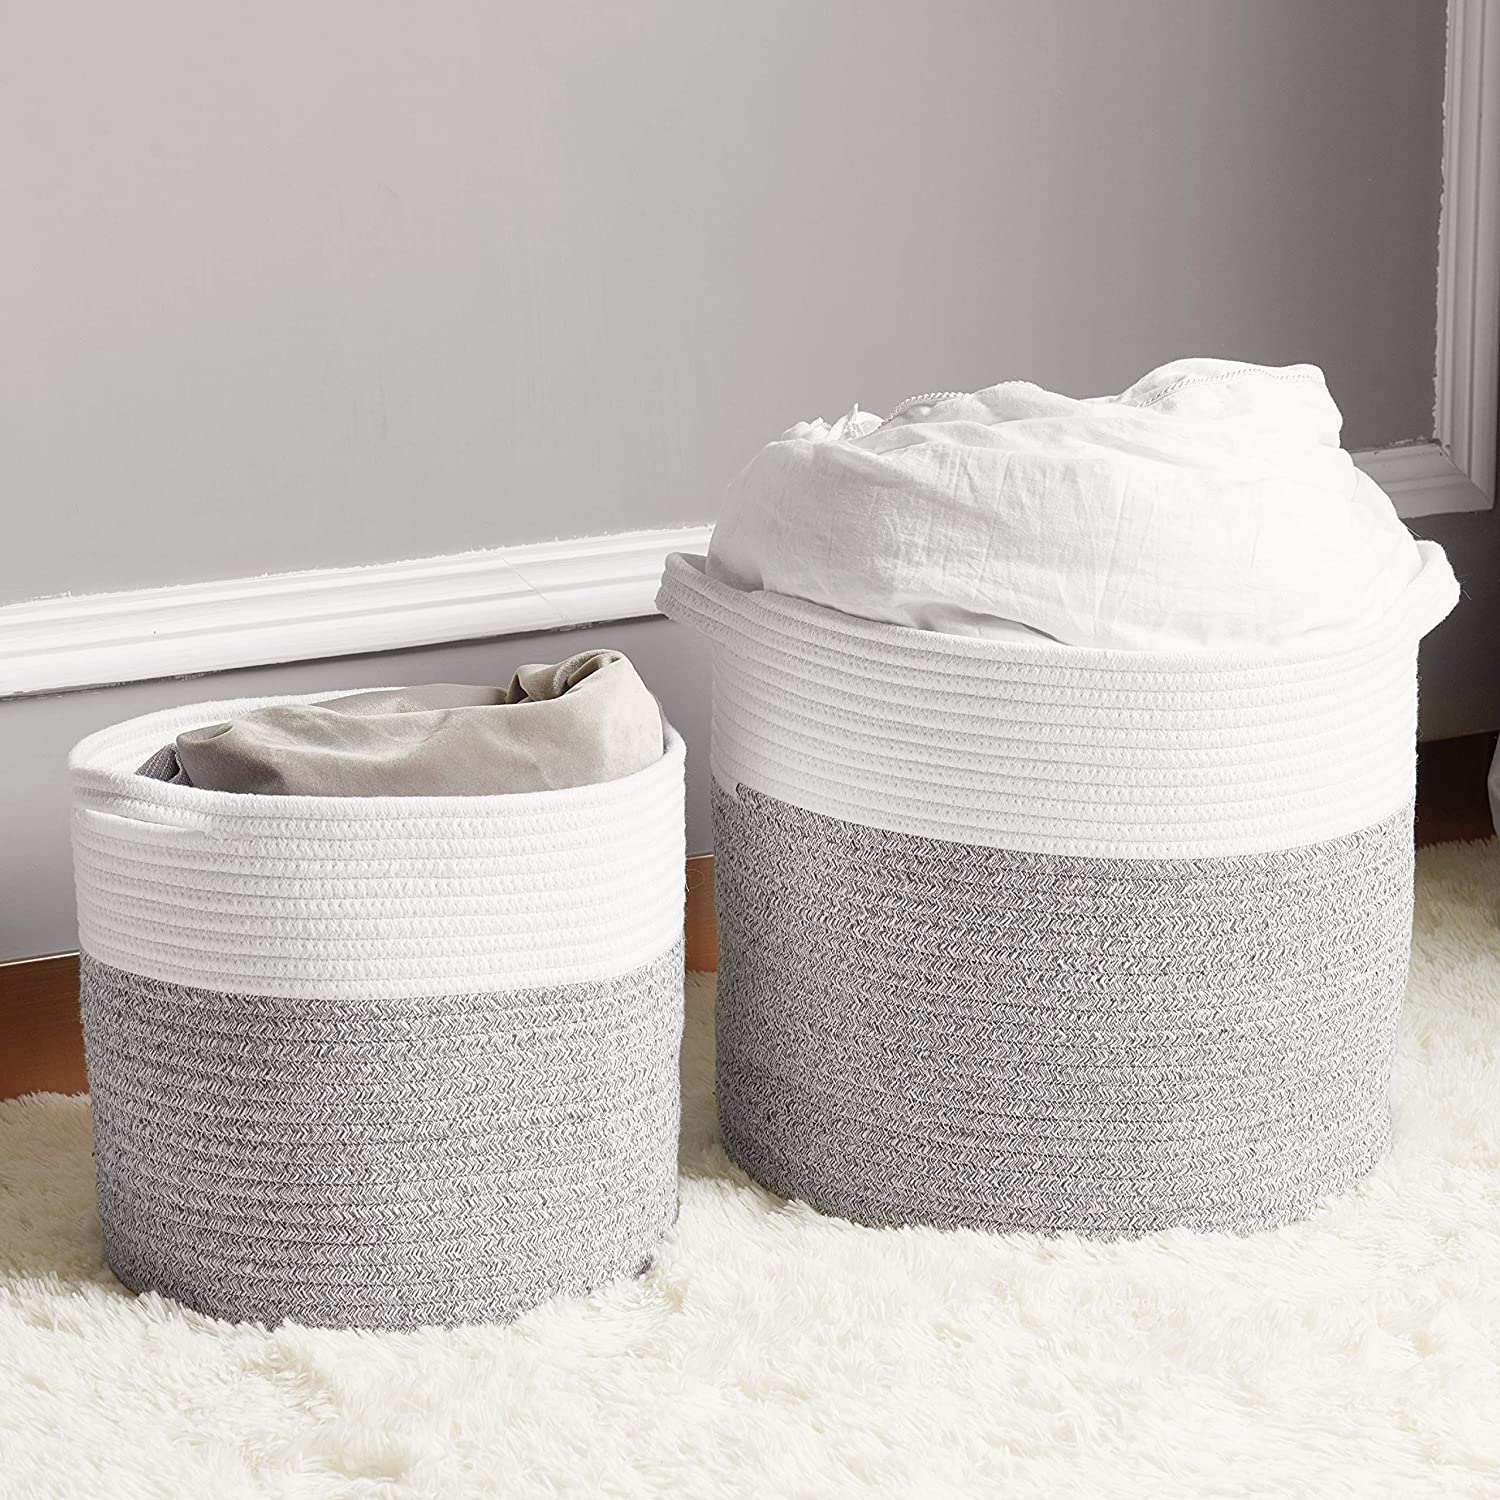 gray and white woven floor basket